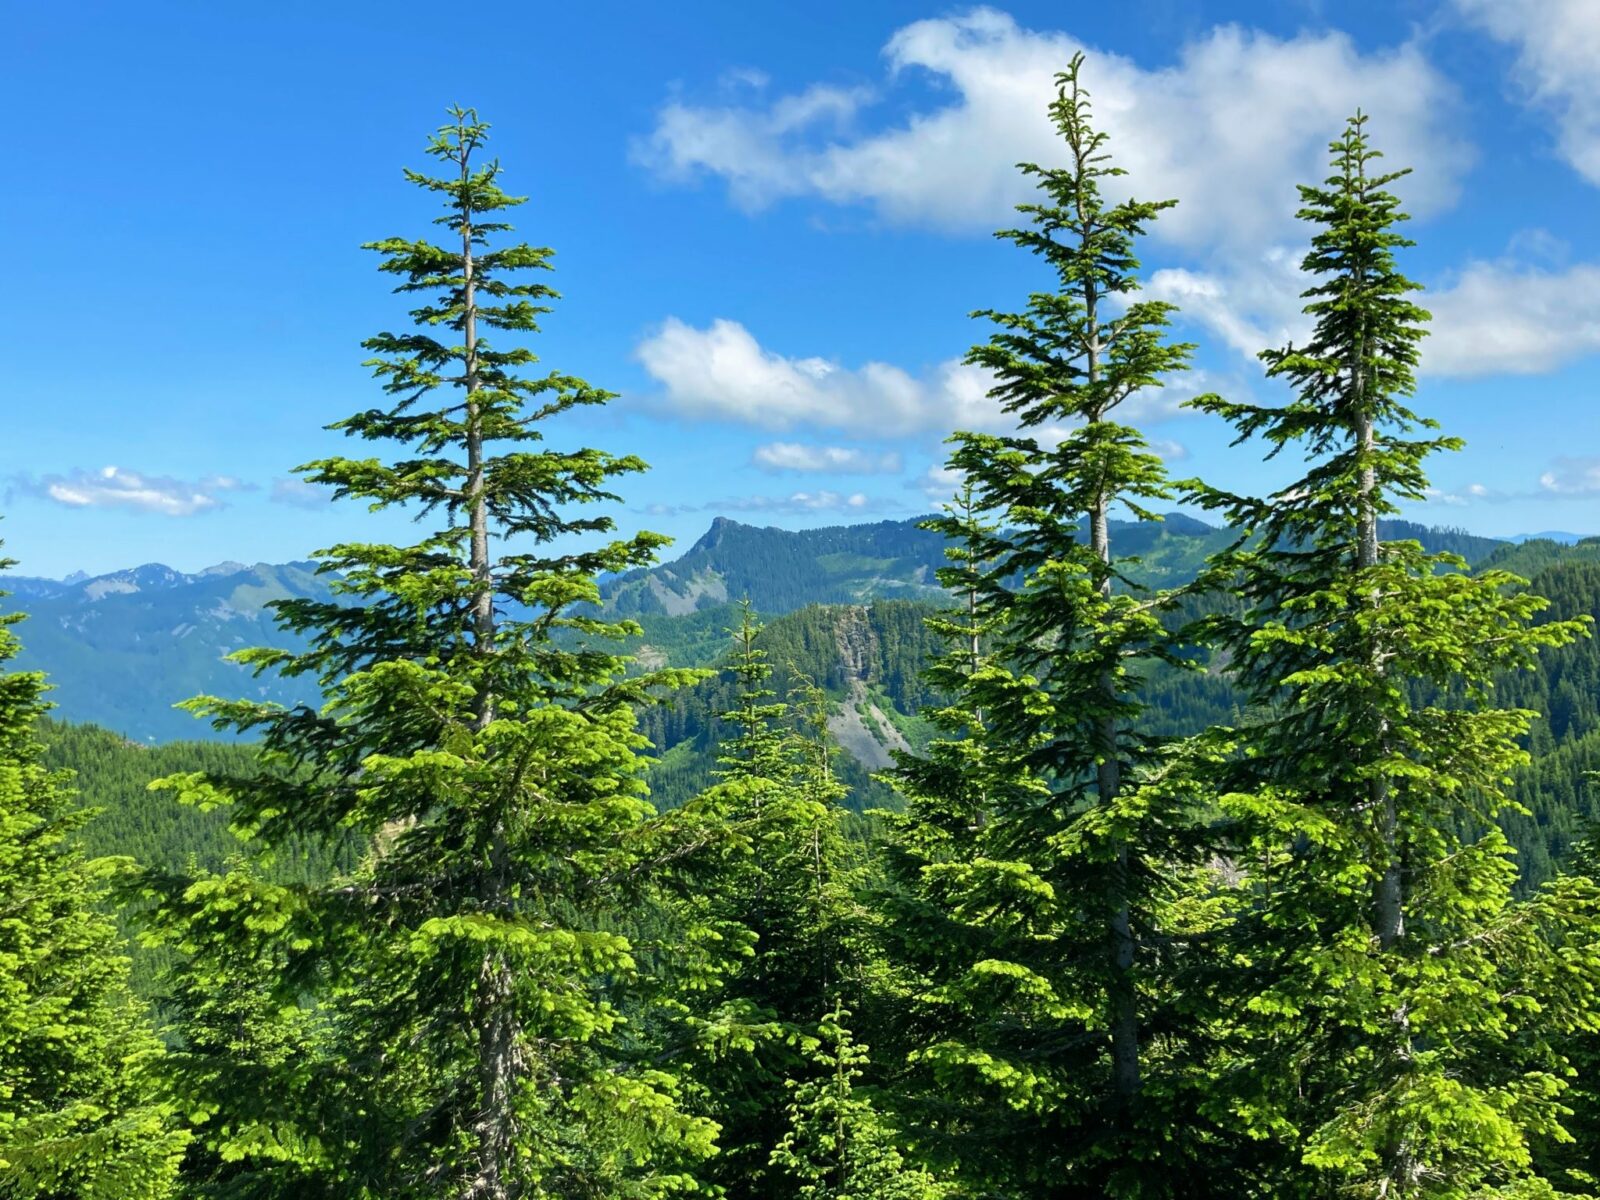 A distant mountain in the background and evergreen trees in the foreground from the summit of Mt Washington near Seattle